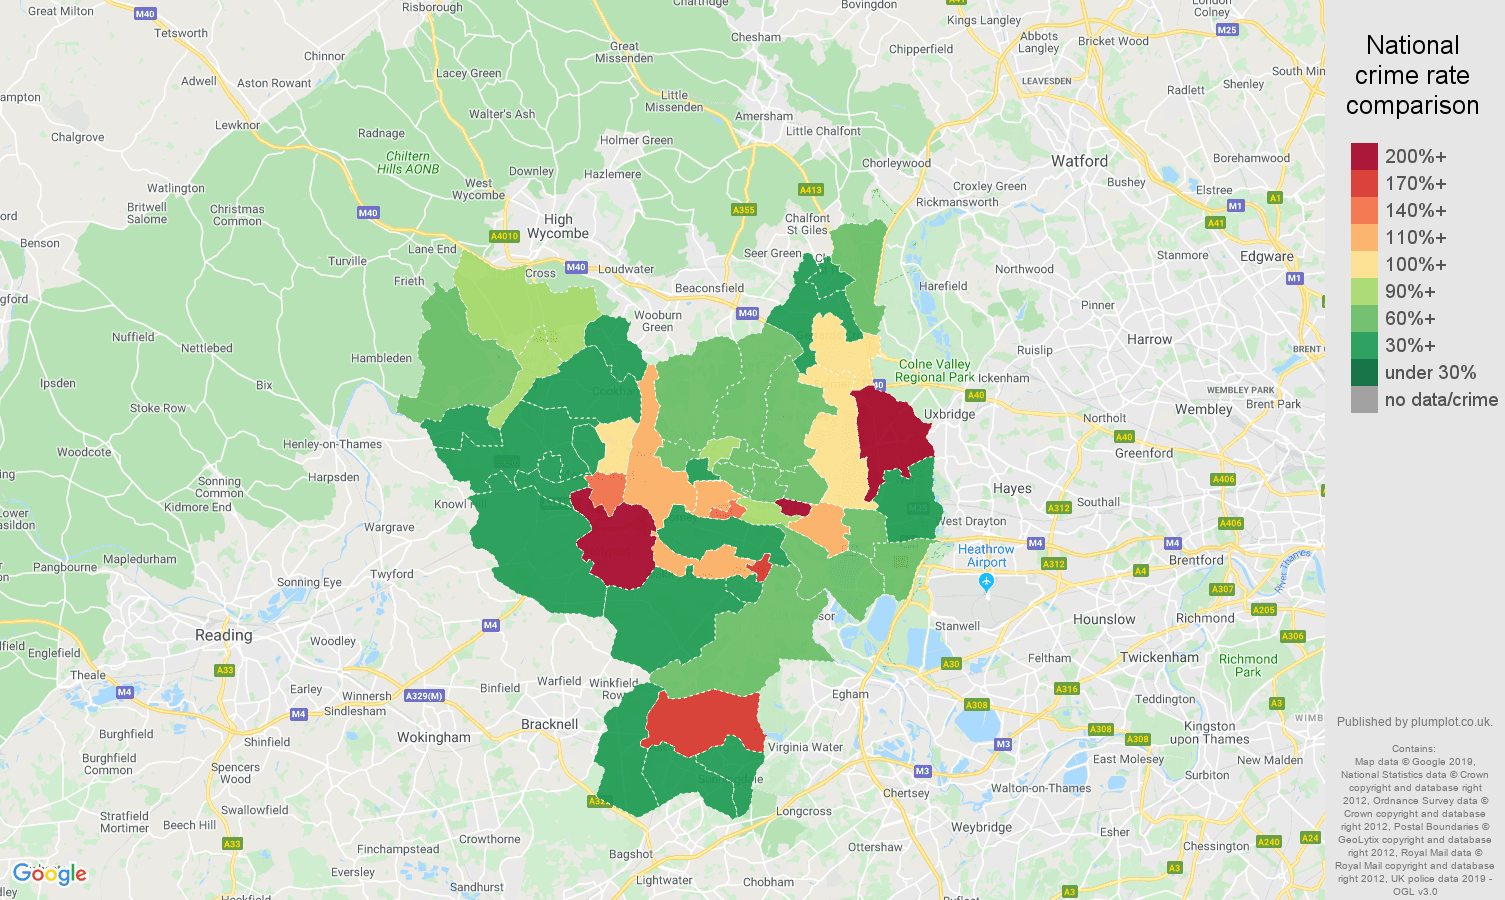 Slough other theft crime rate comparison map